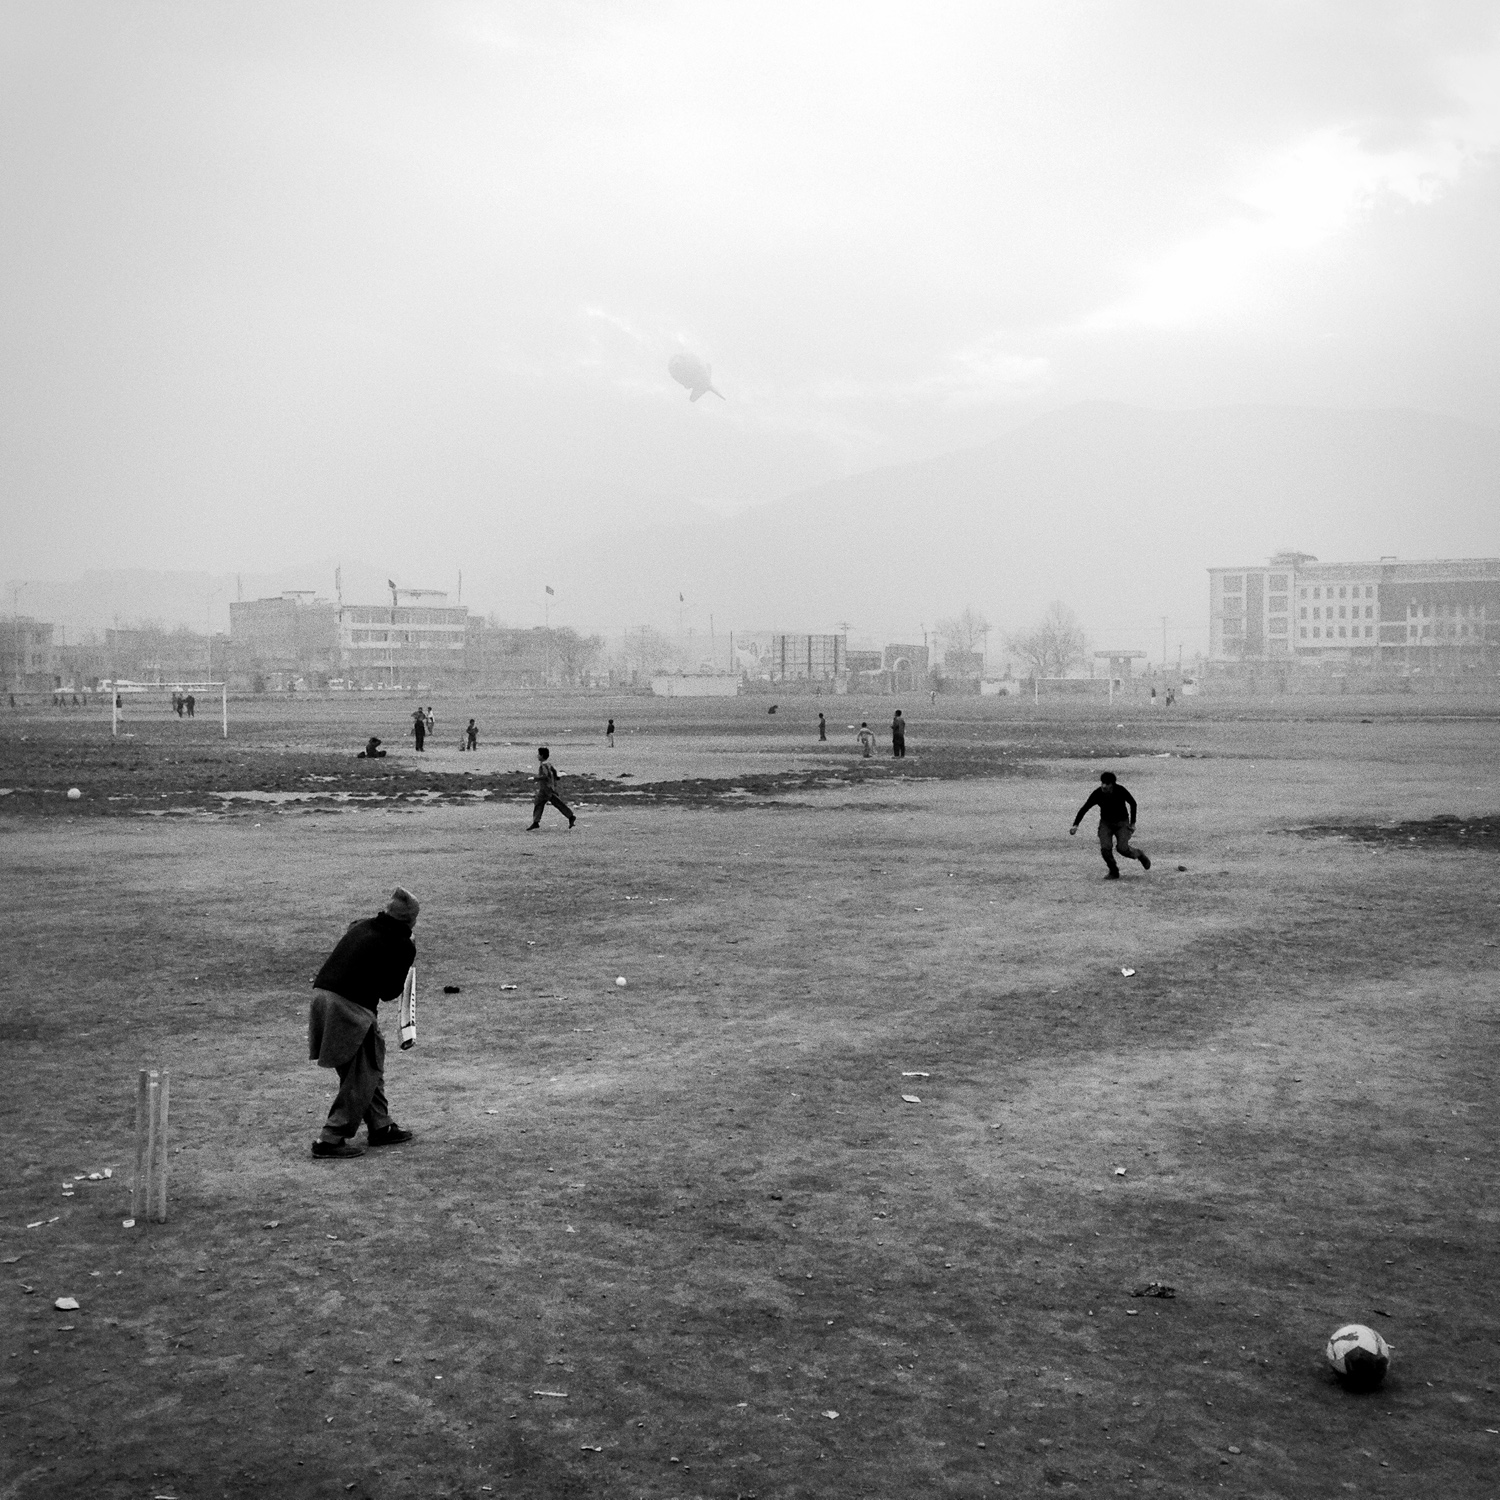 Cement Khana, Kabul, Afghanistan
                              #Cricket in #Kabul. Under the watchful eye of Uncle Sam Cam above.